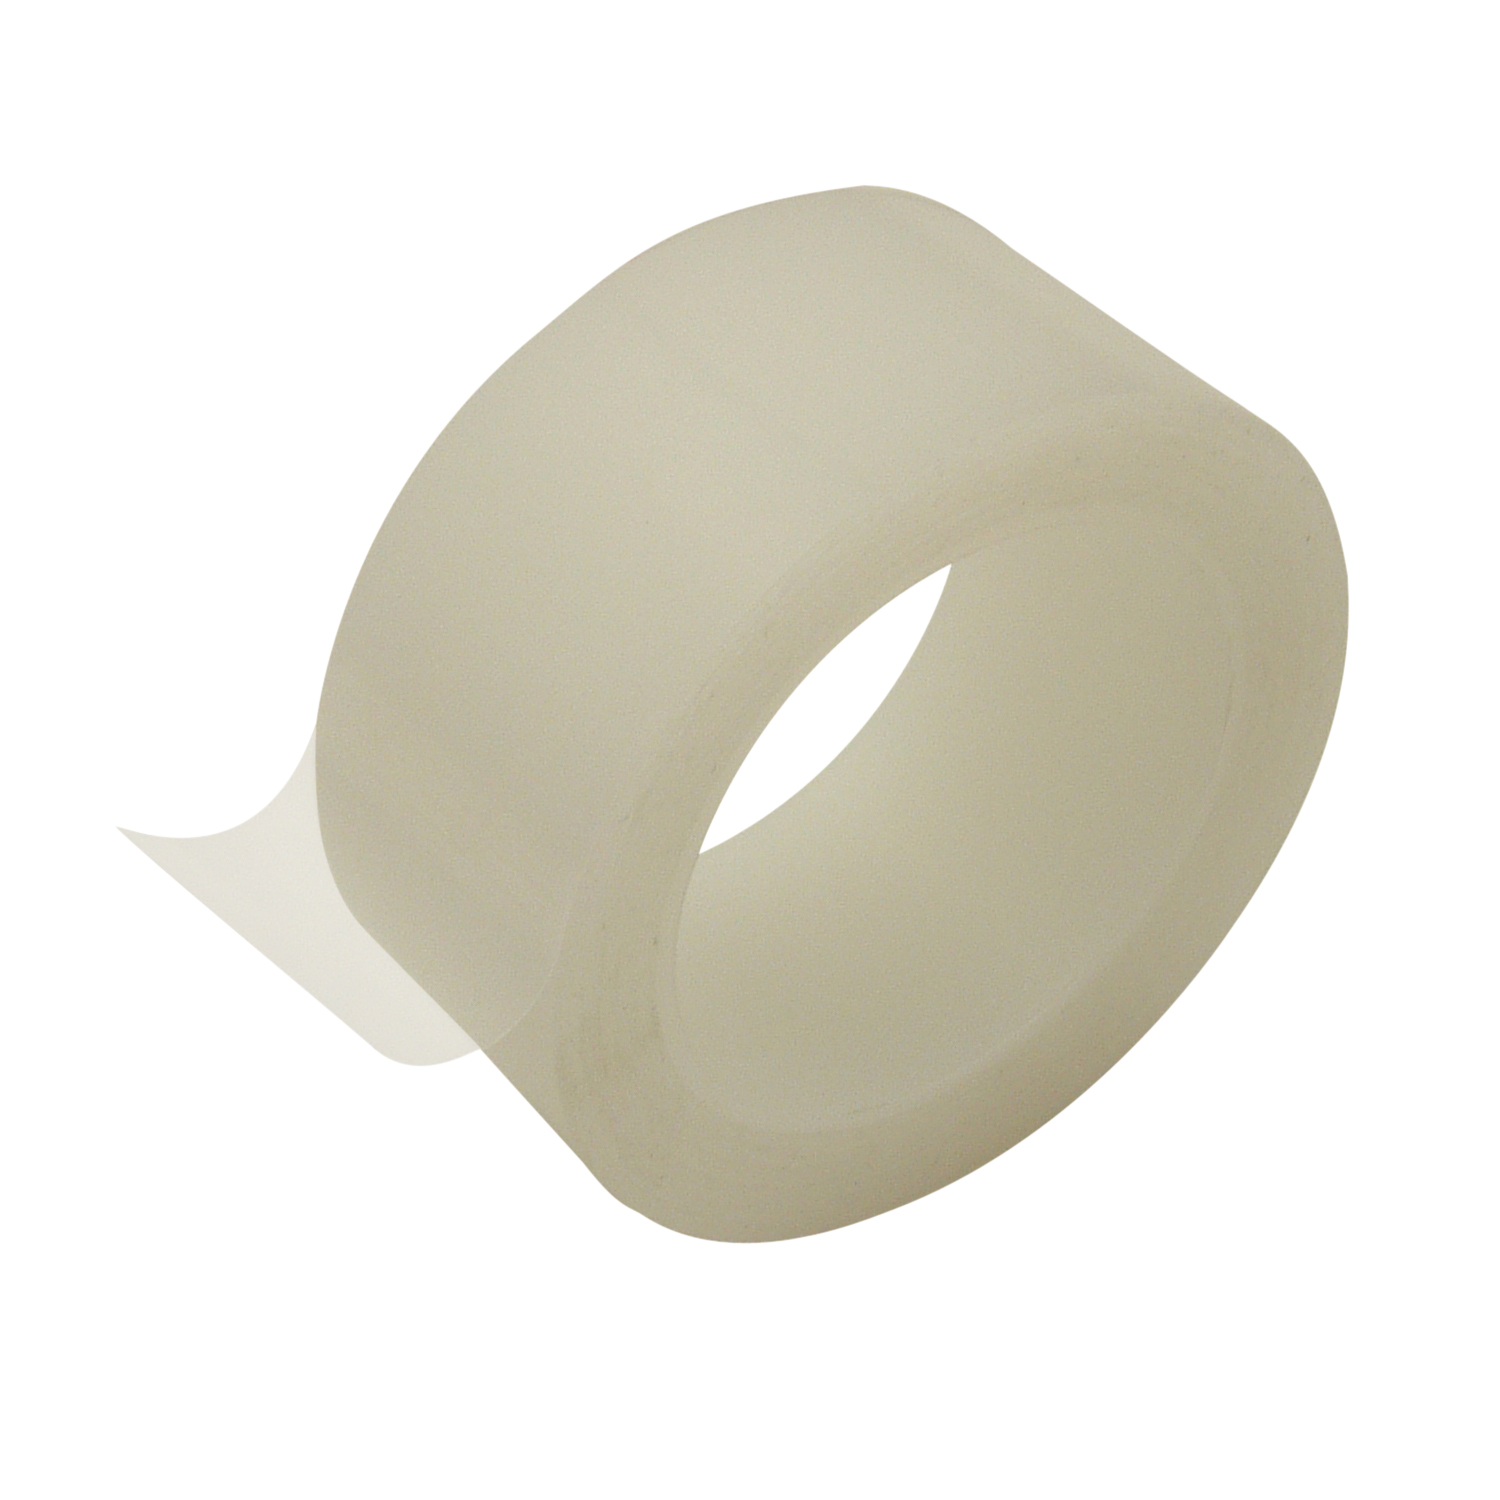 Patco 560 Polyethylene Clean Removal Tape